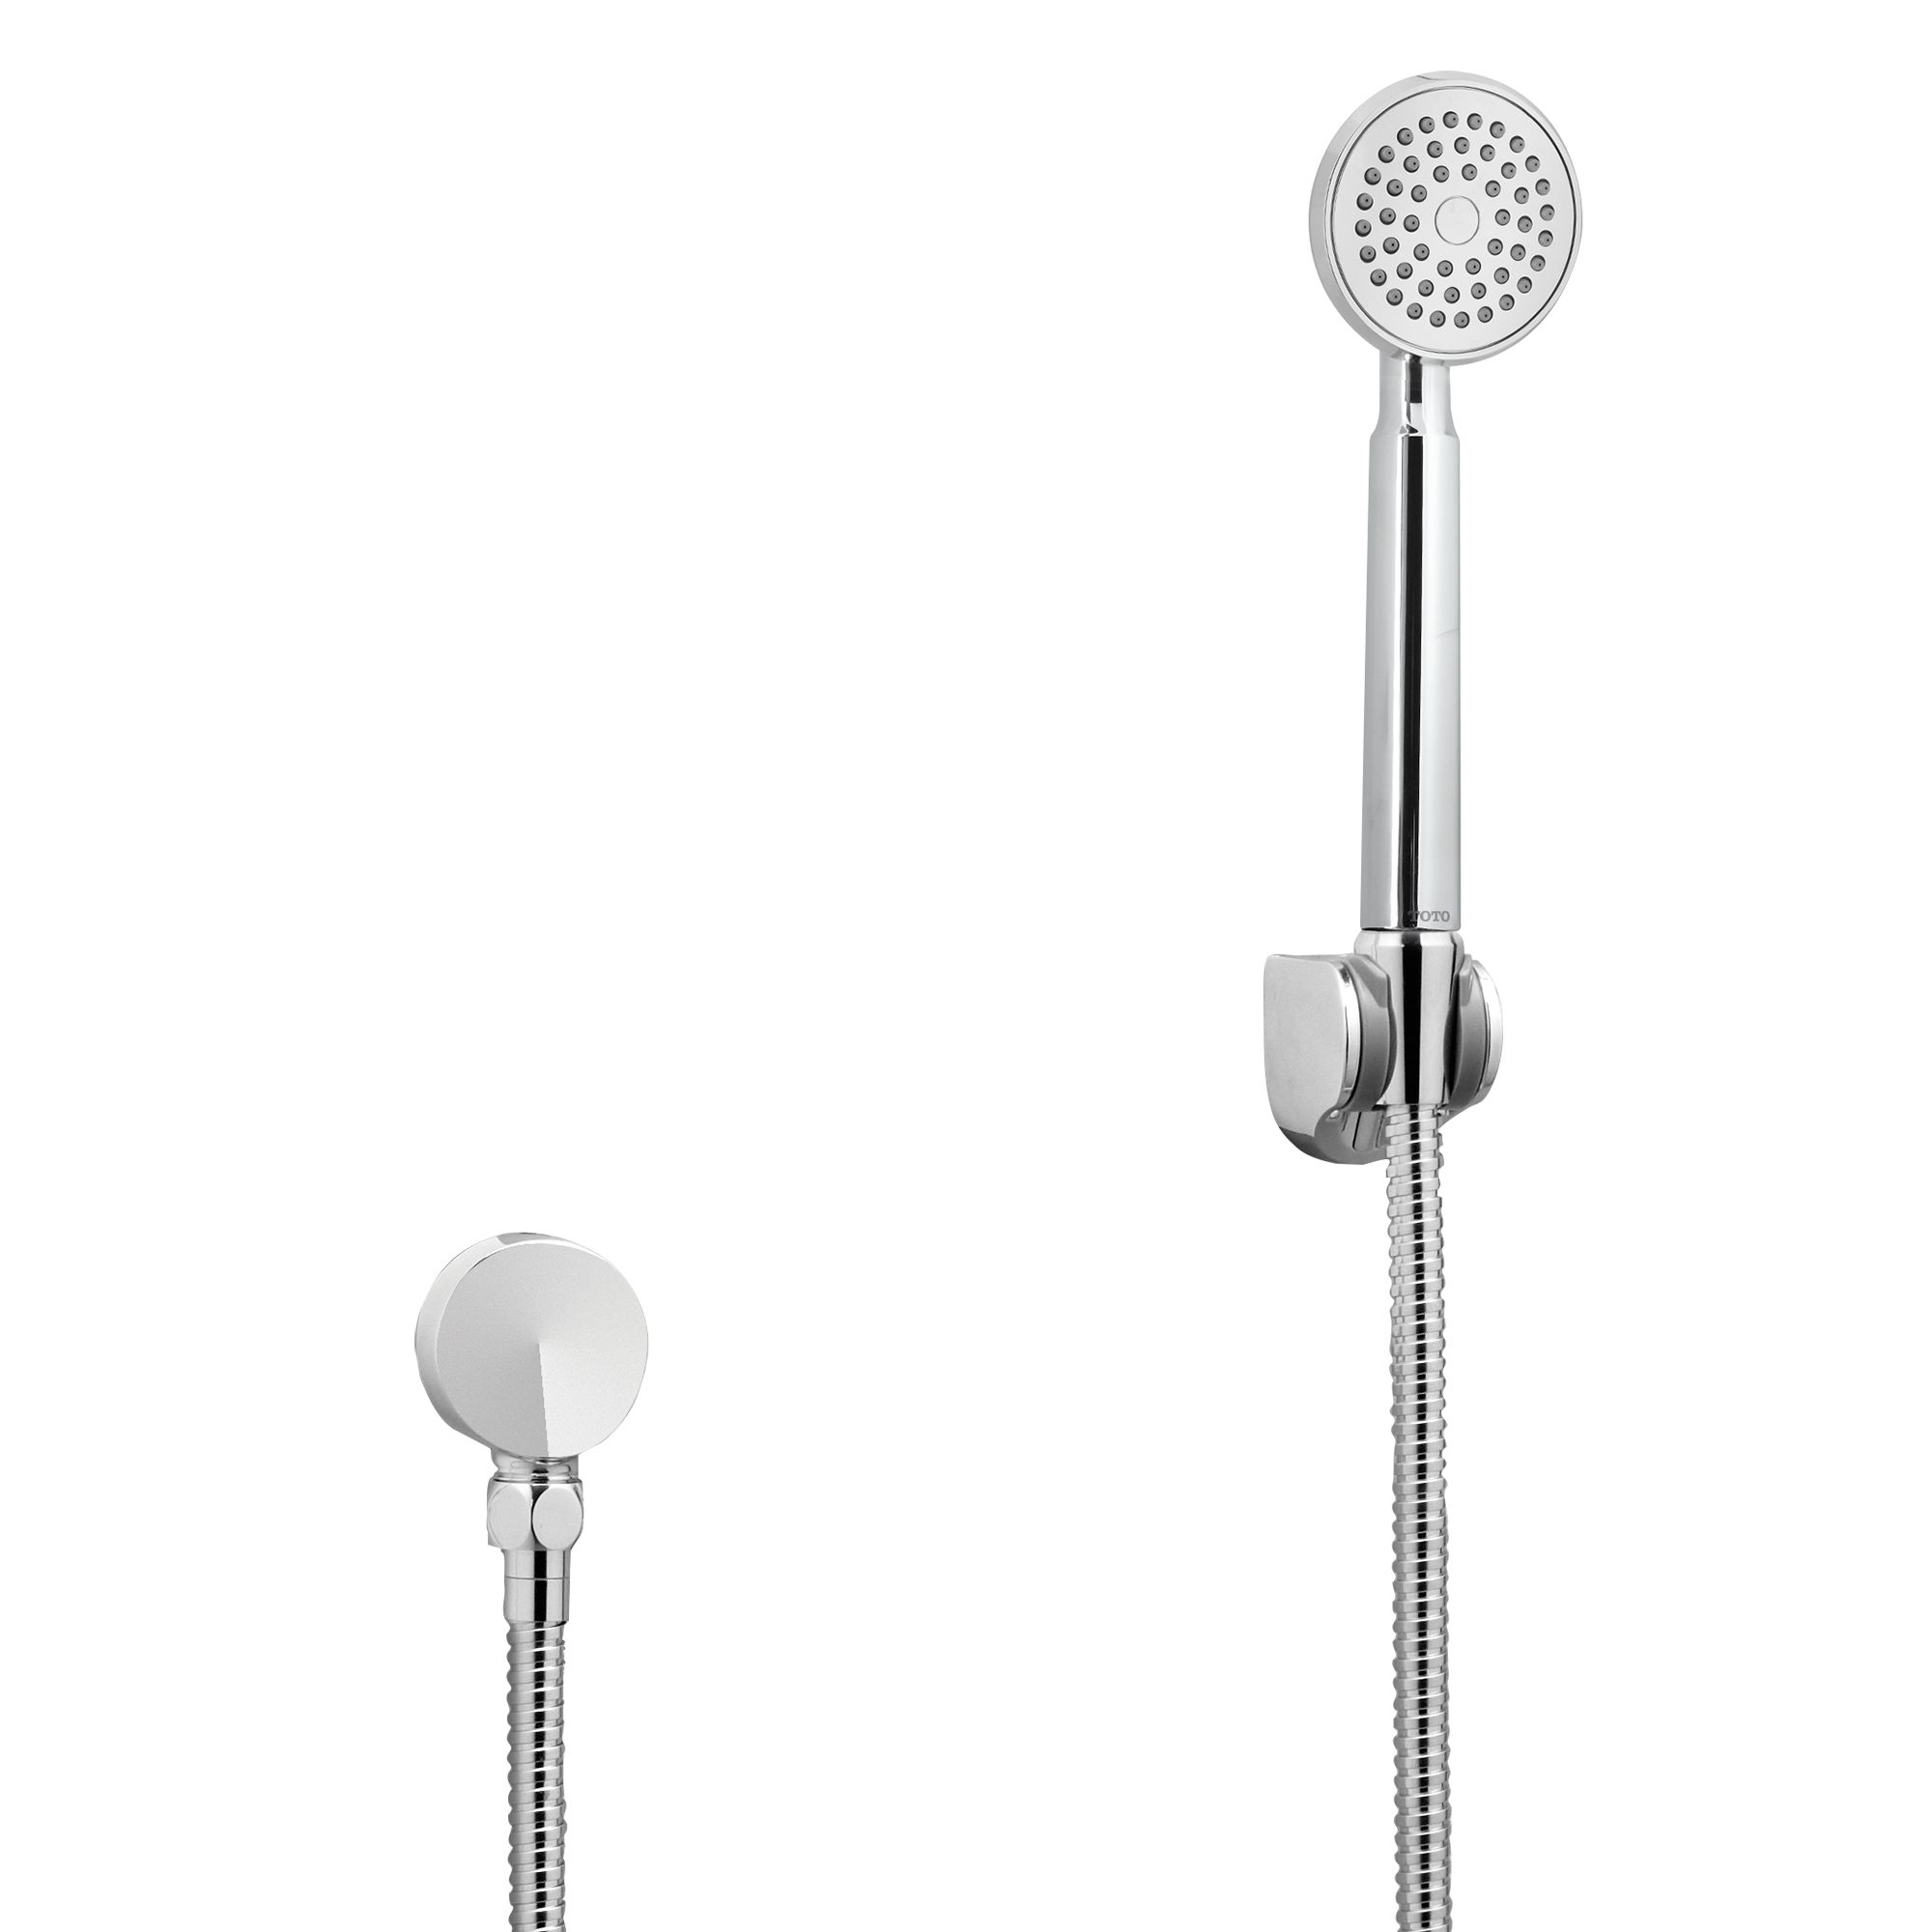 Transitional Collection Series B Single-Spray Handshower 3-1/2" - 2.5 gpm